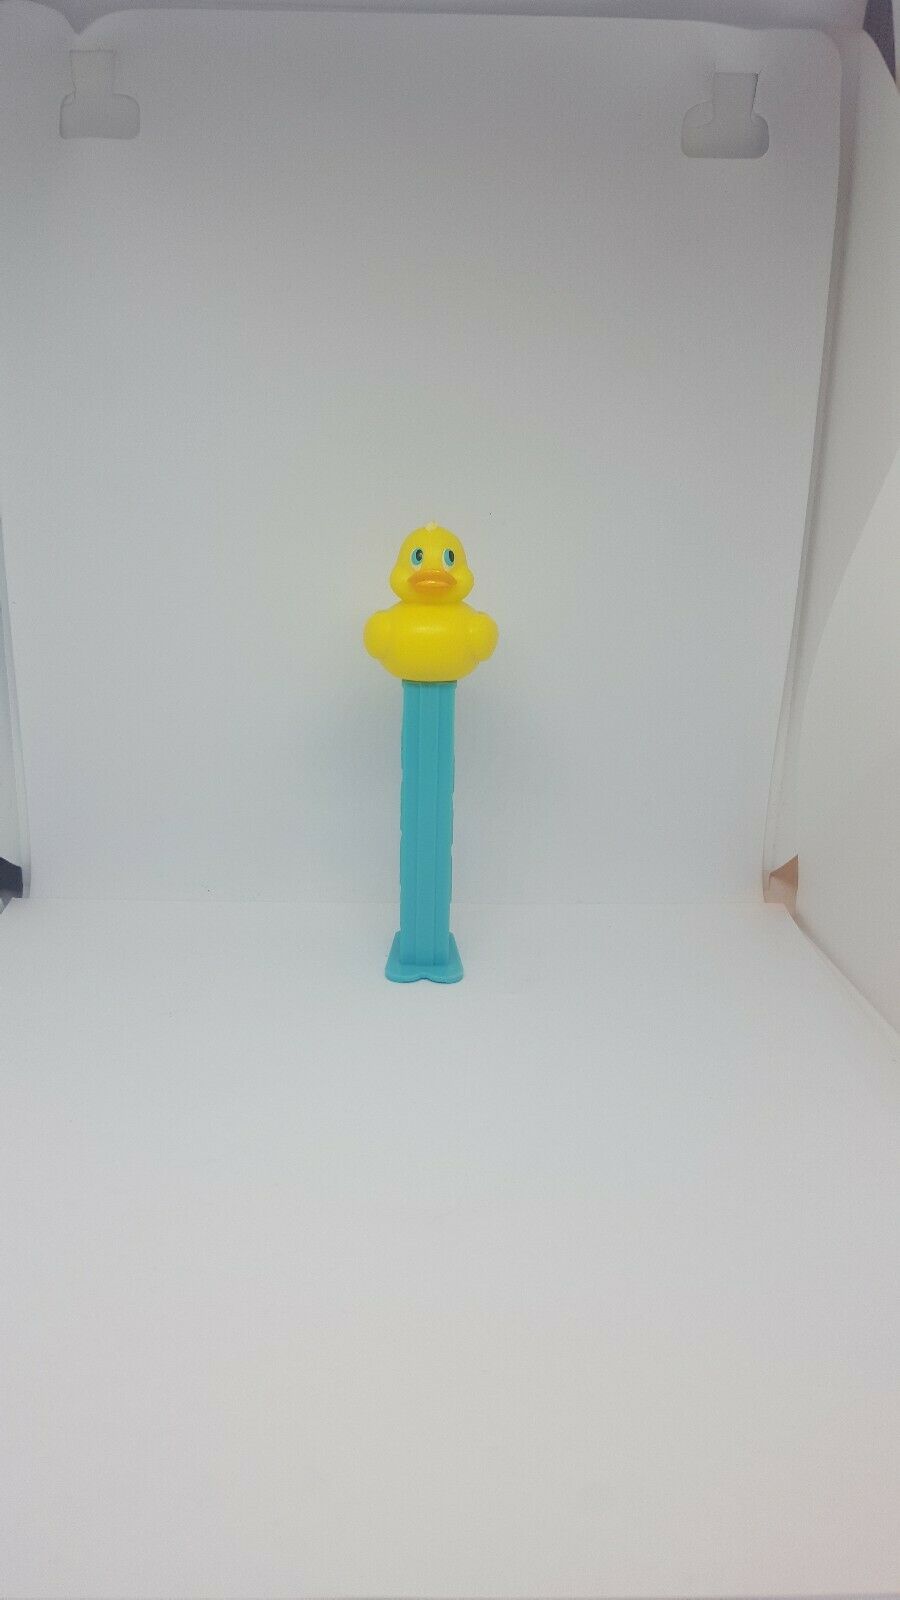 Rubber Ducky Duck Turquoise Stem Pez Dispenser Mand In China With Feet